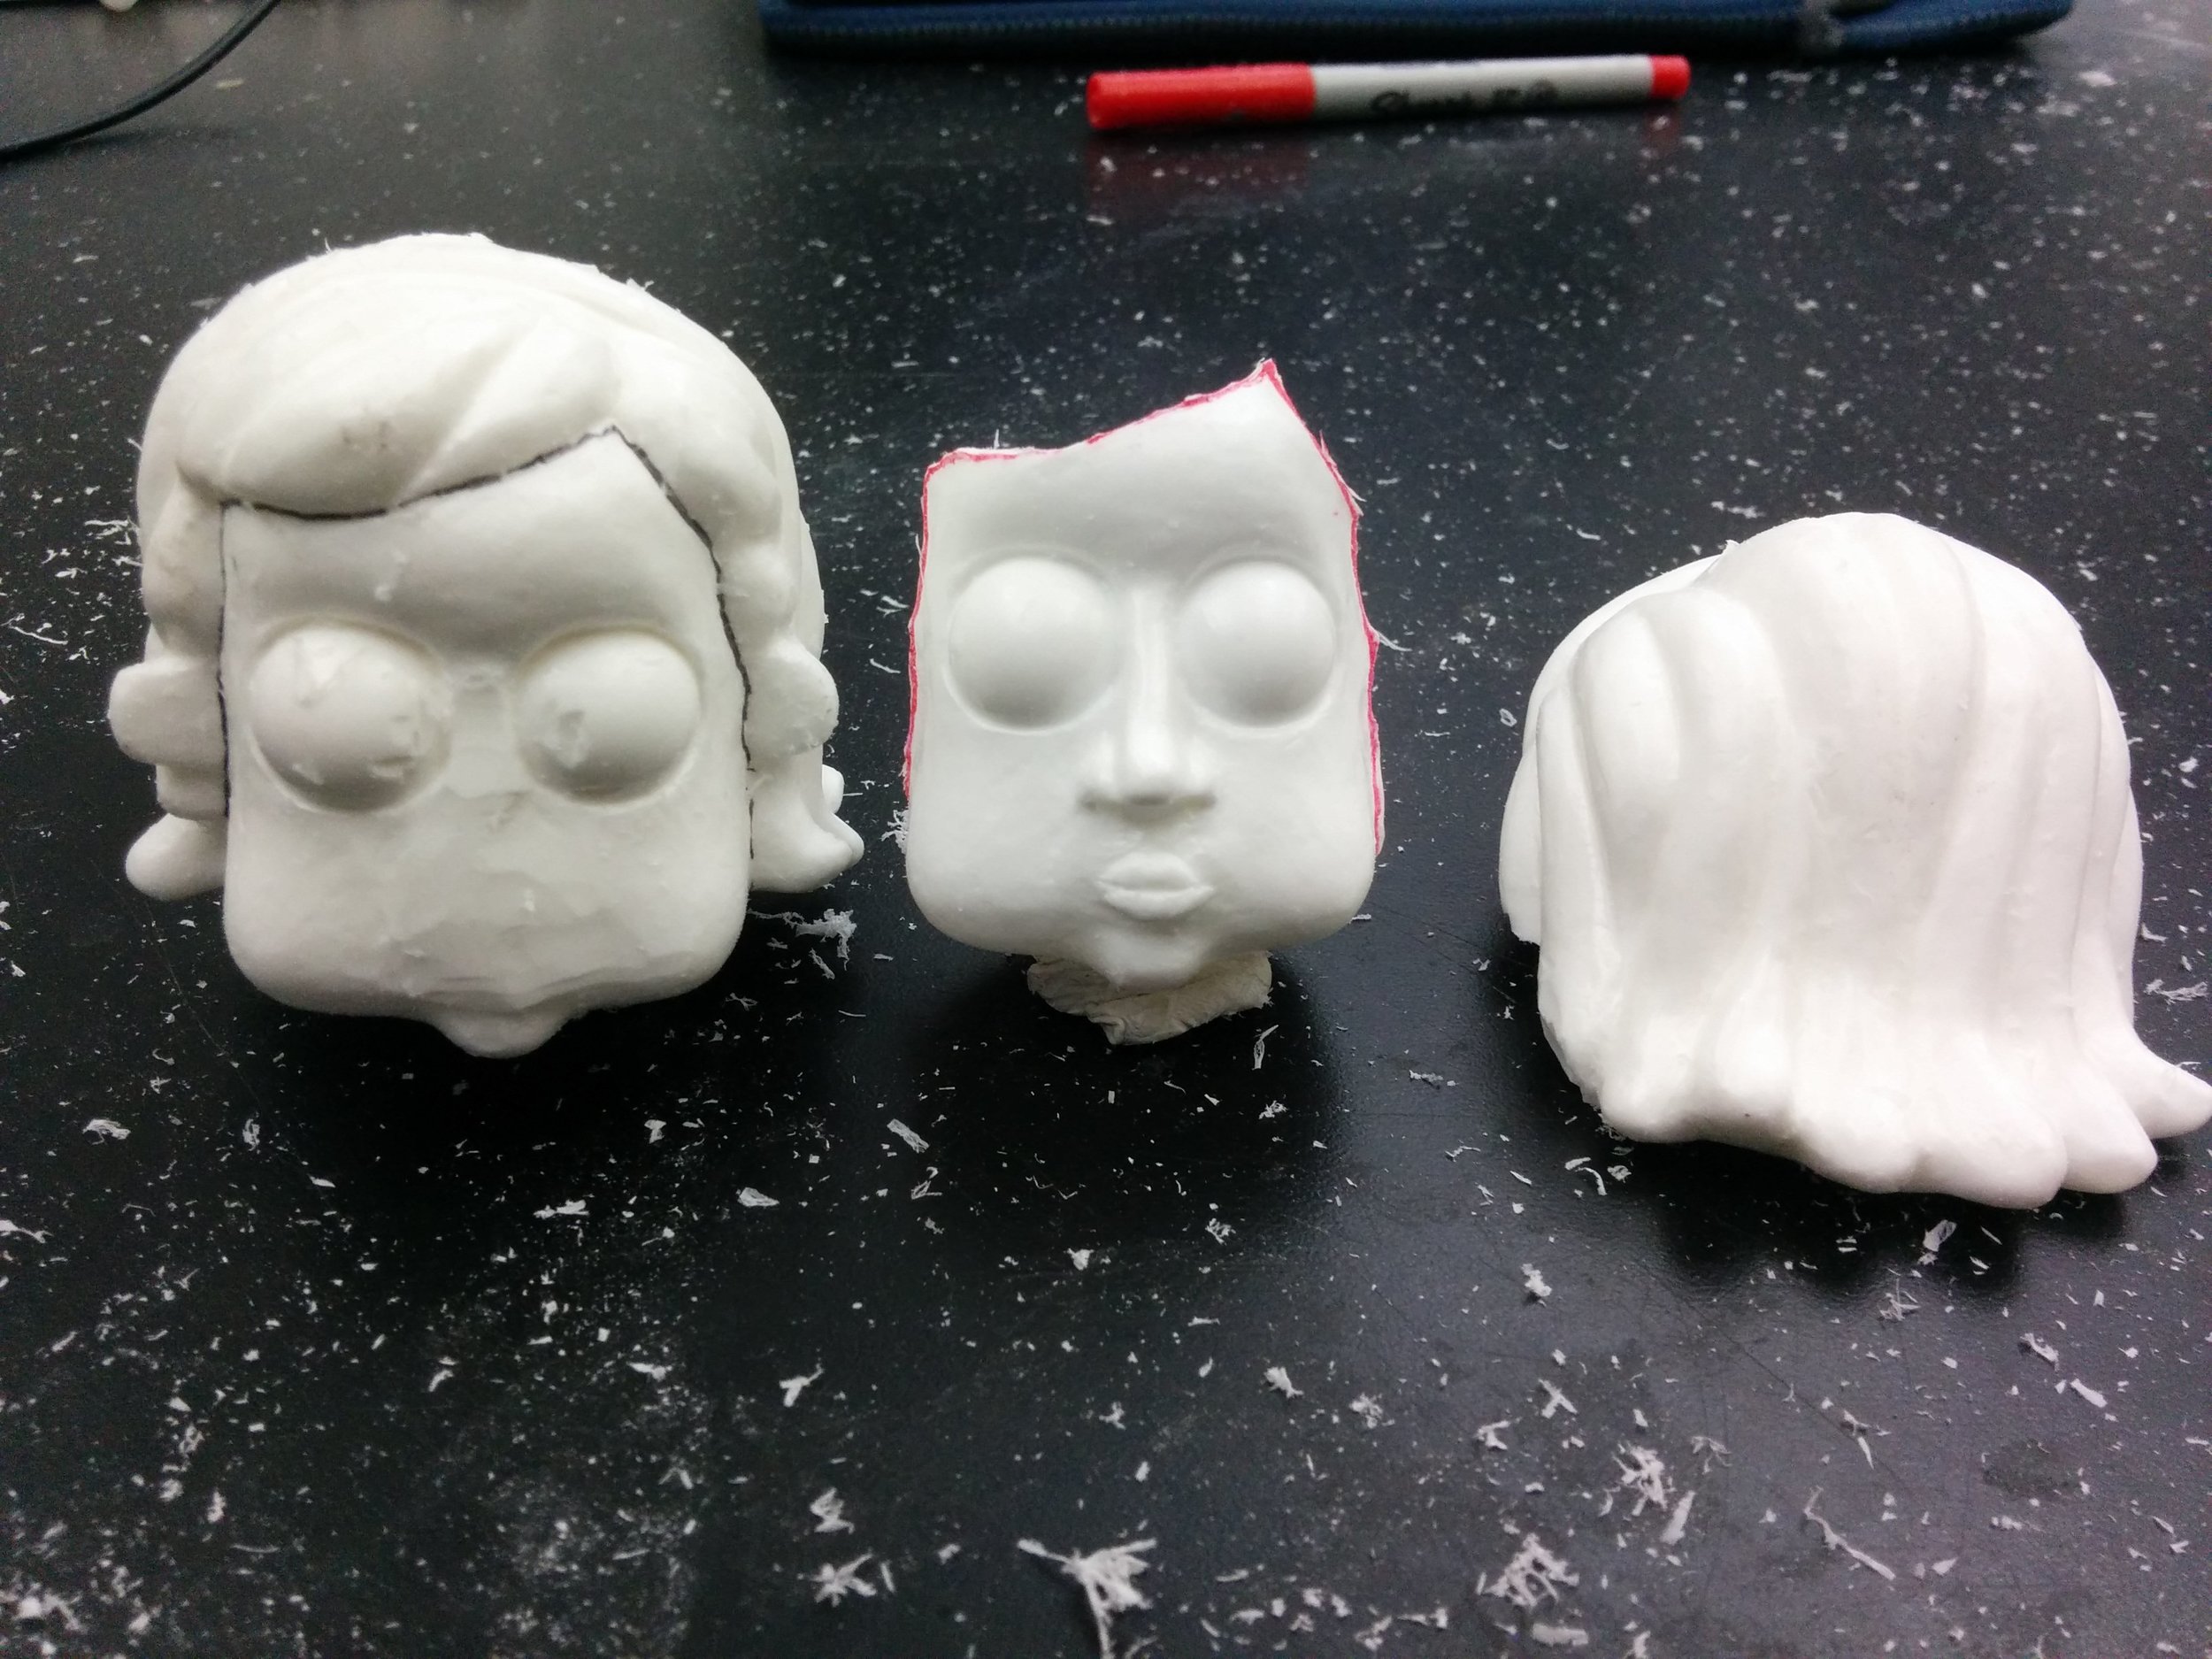  Solid and hollow casts of the head, to form the head block and replacement face. 